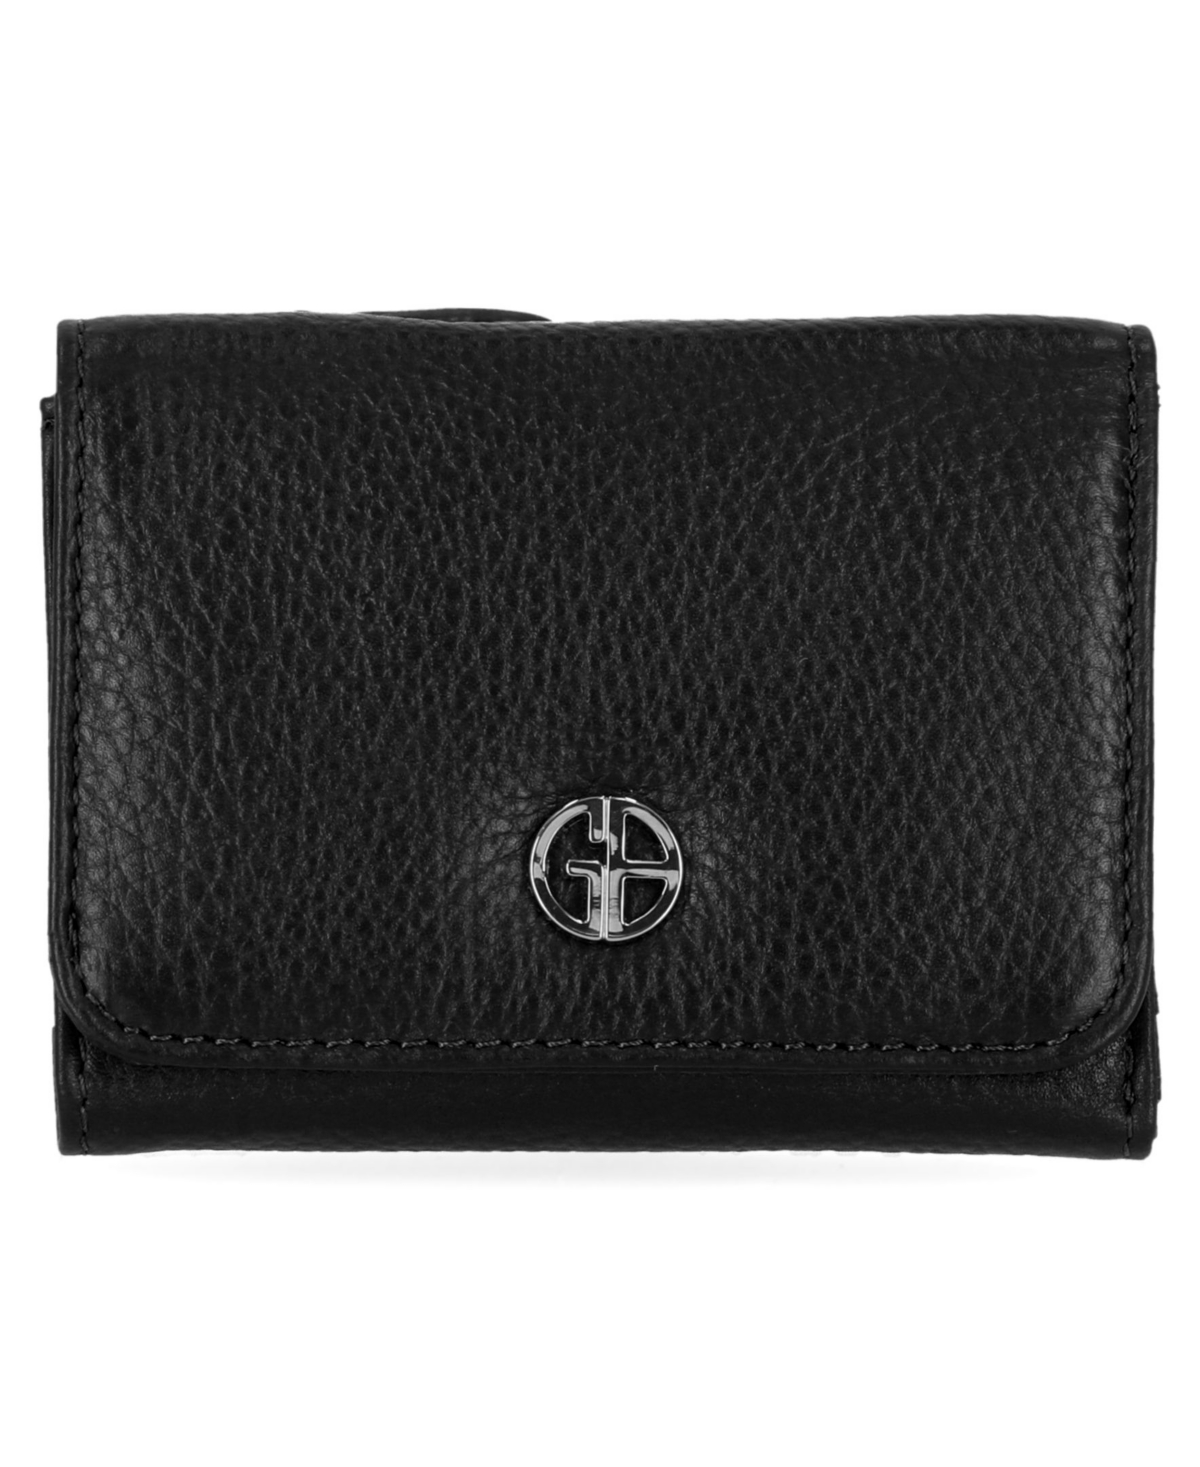 Softy Leather Trifold Wallet, Created for Macy's - Black/Silver